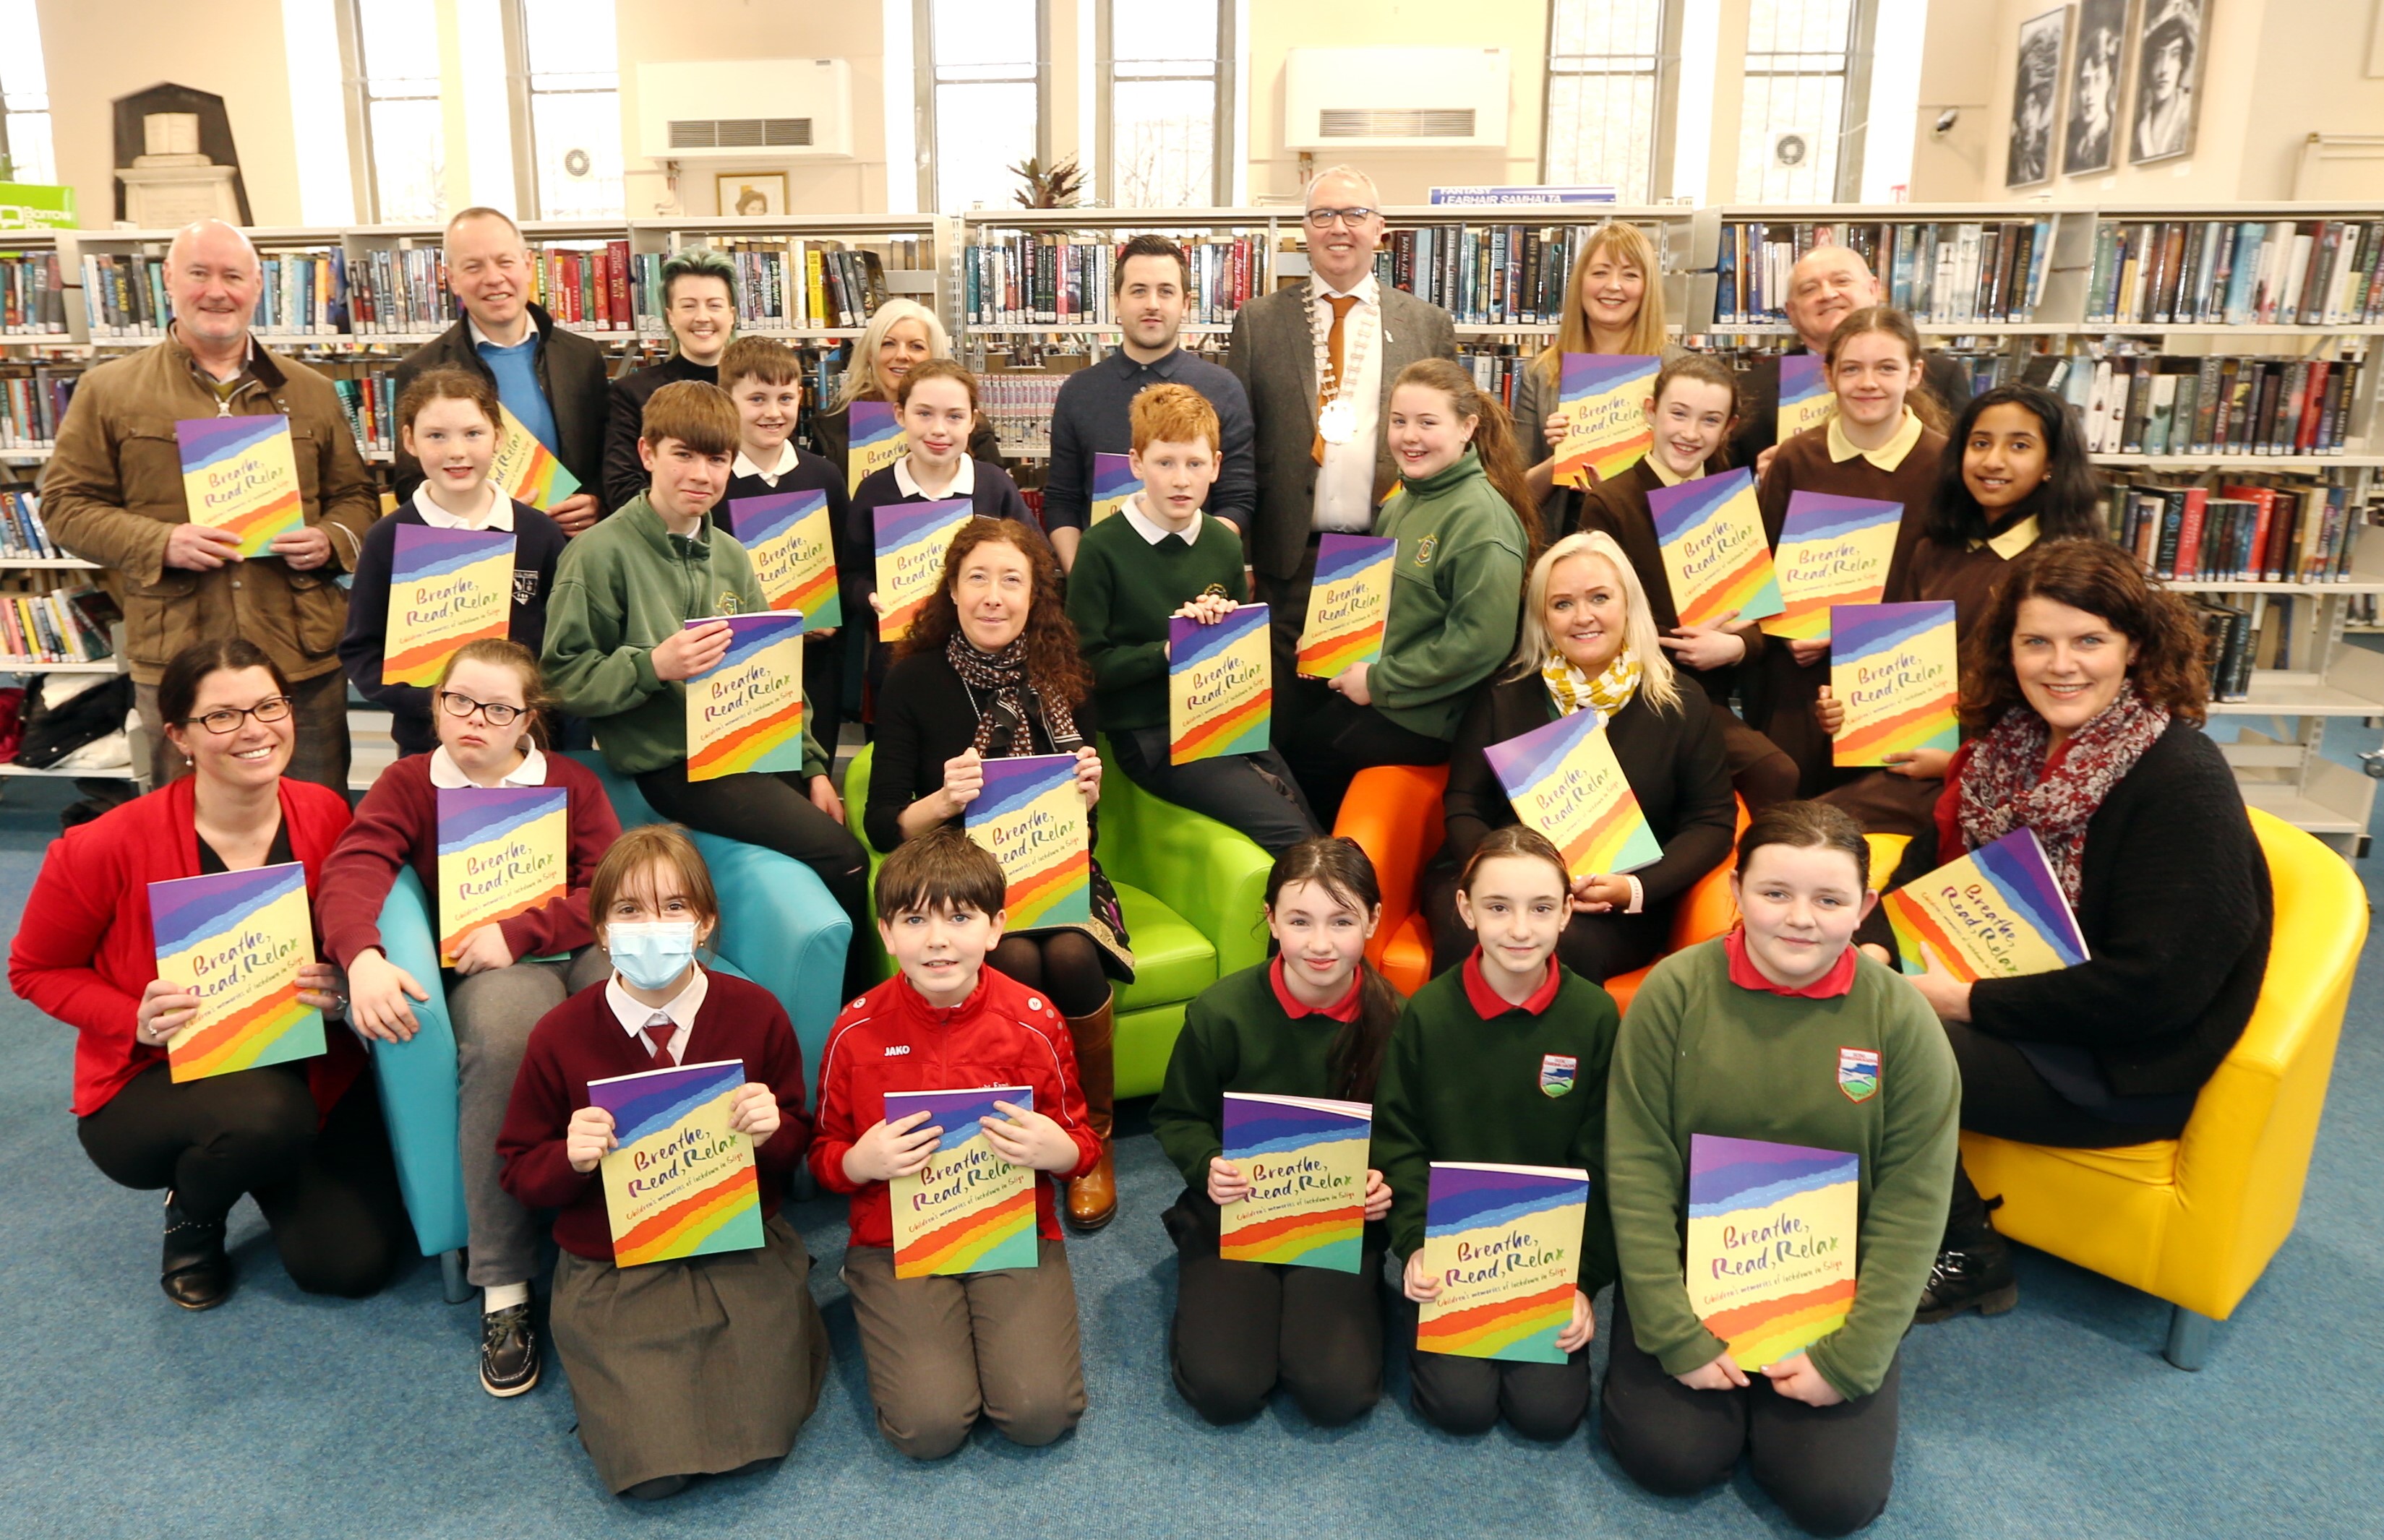 Leas Cathaoirleach Councillor Dónal Gilroy launches Breathe, Read, Relax; a book published as part of a Sligo Libraries project with Primary Schools